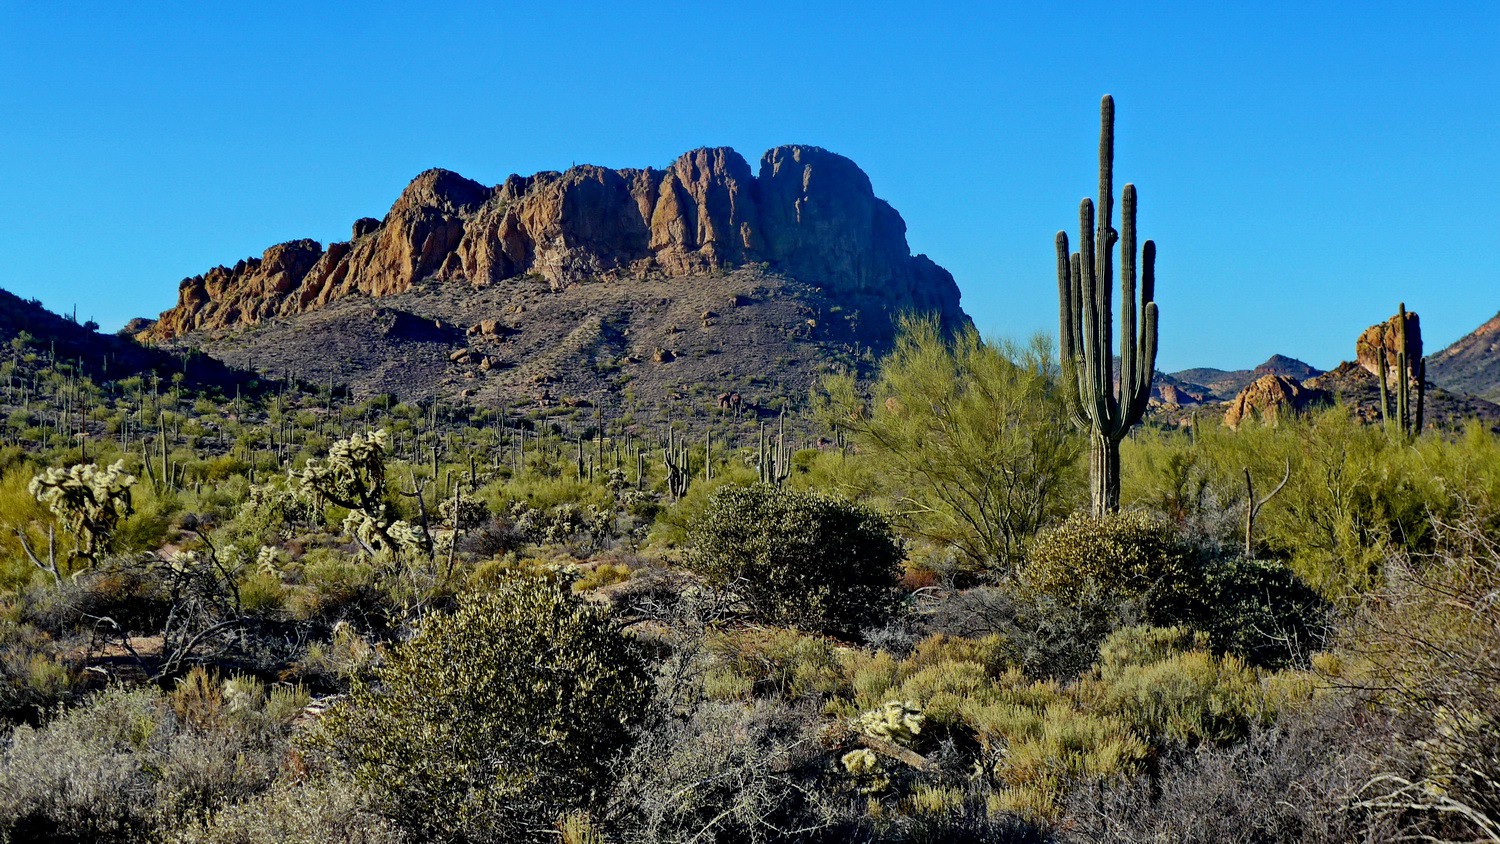 Unkown Rocky Peak in the Superstition Mountains north of our campsite Apache Trail